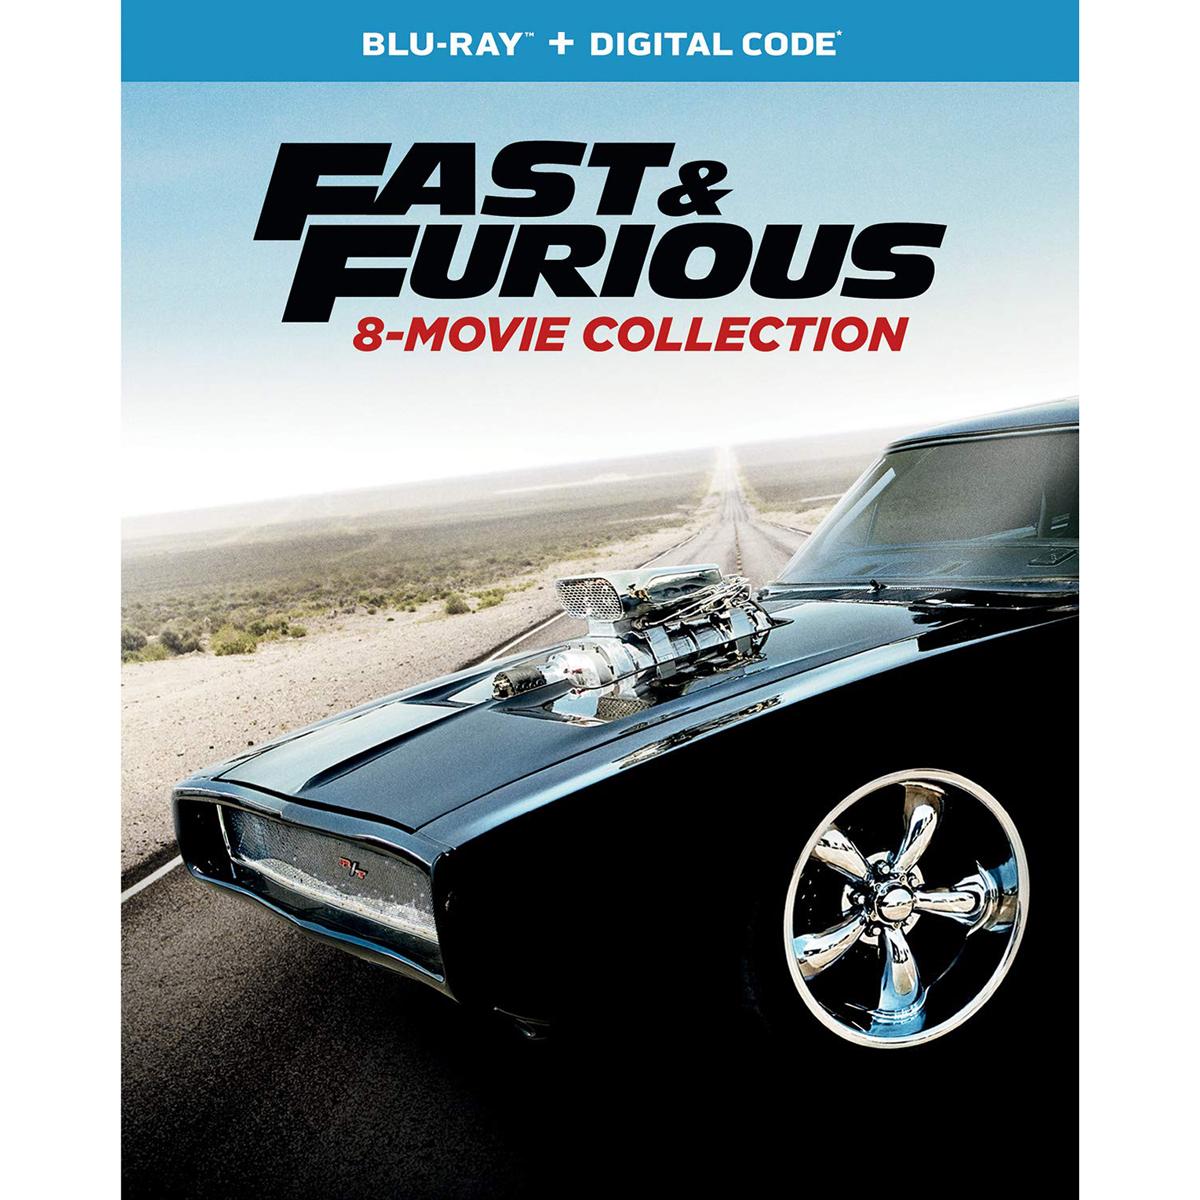 Fast and Furious 8-Movie Collection Blu-ray for $28.99 Shipped